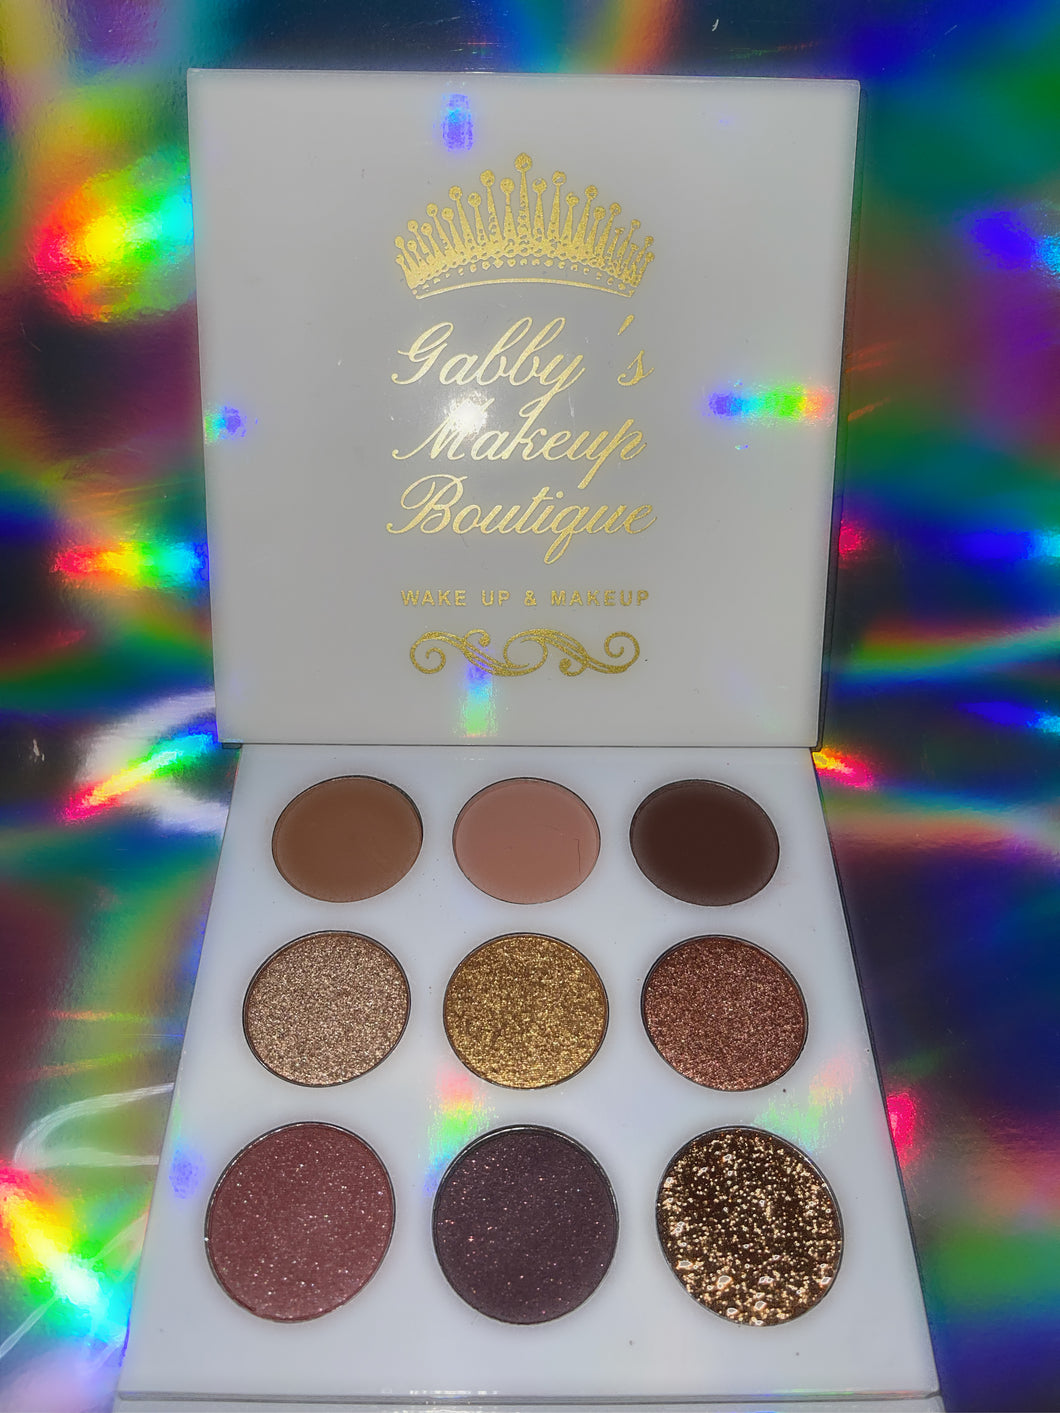 Gabby Makeup Boutique Eyeshadow Palette